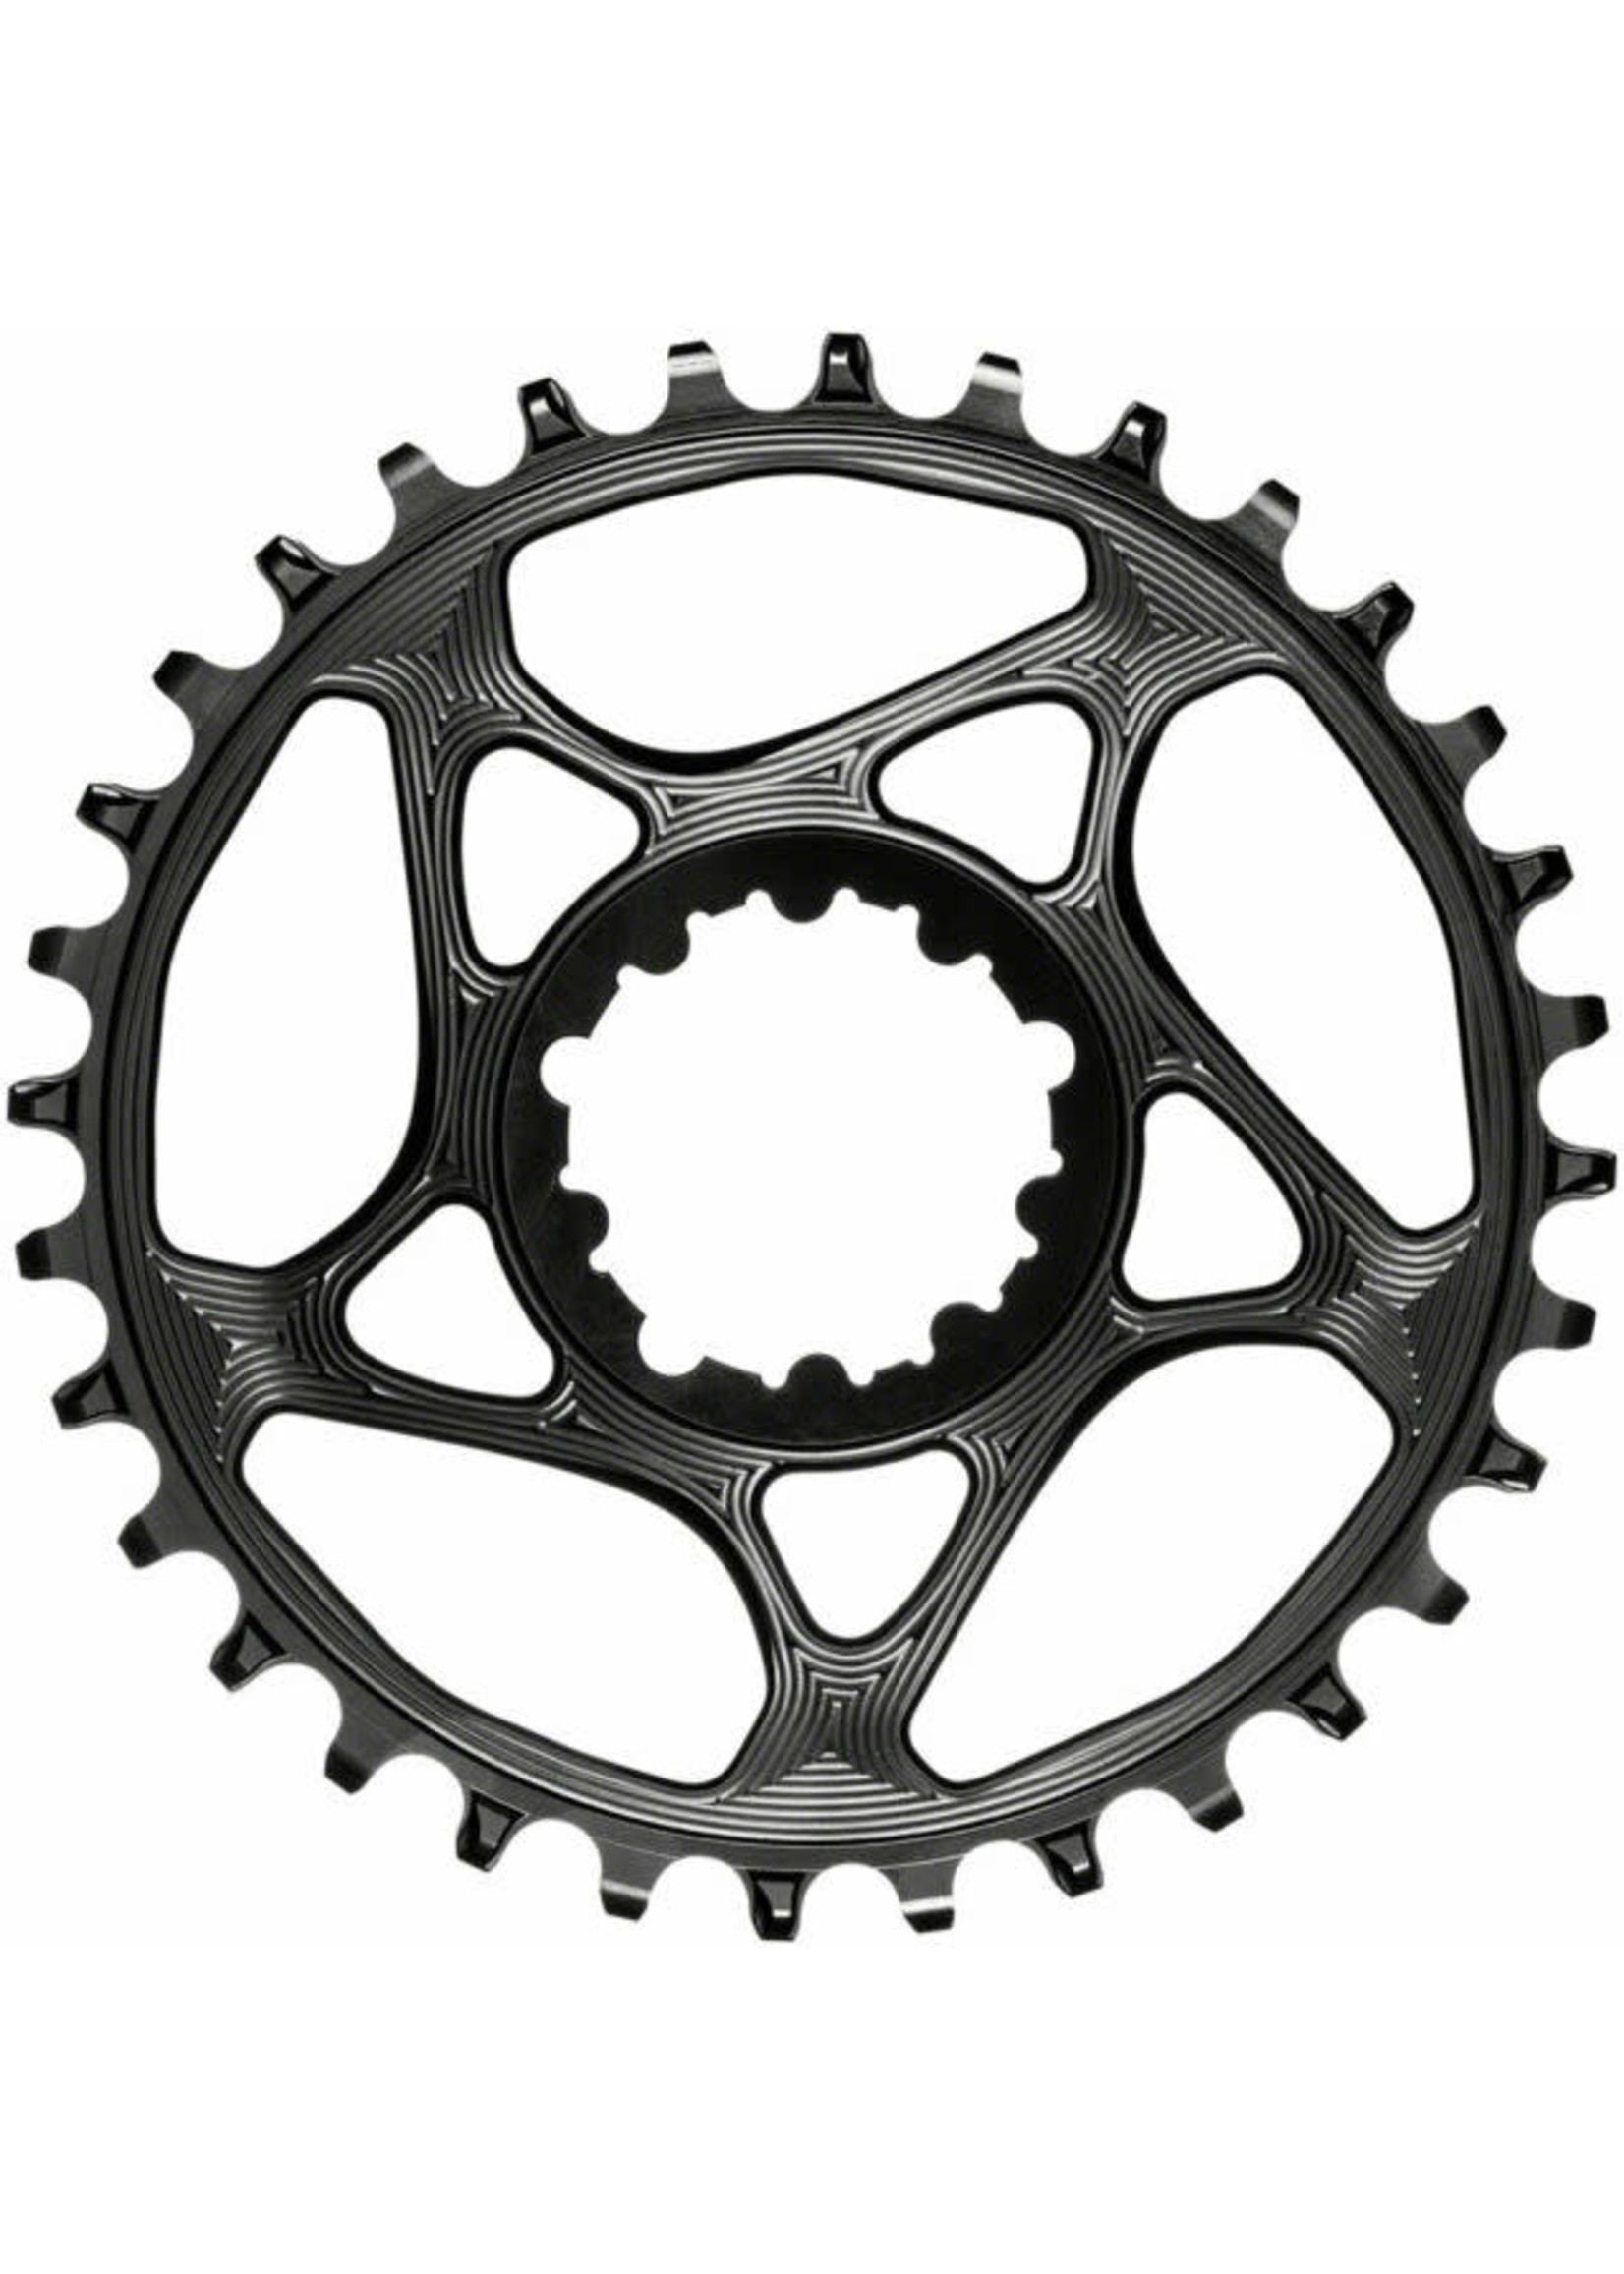 Absolute Black AbsoluteBlack Round N/W Chainring Direct Mount GXP 28T Black